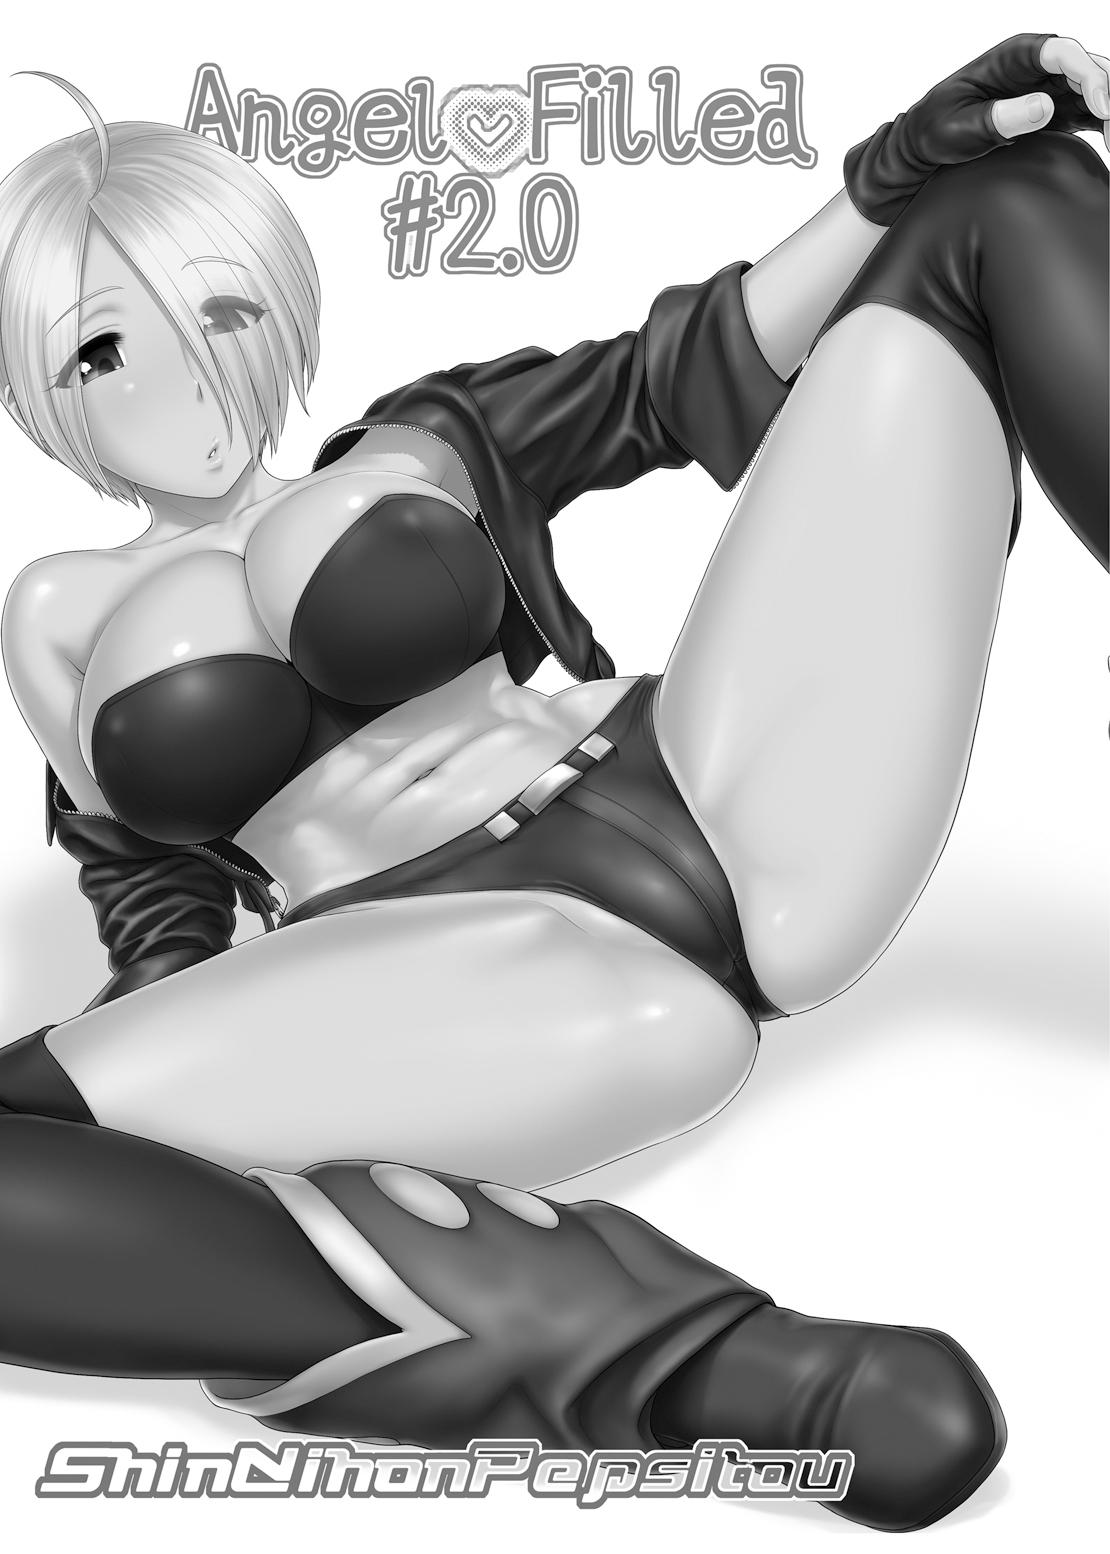 Show Angel Filled #2.0 - King of fighters Hot Girls Getting Fucked - Page 2